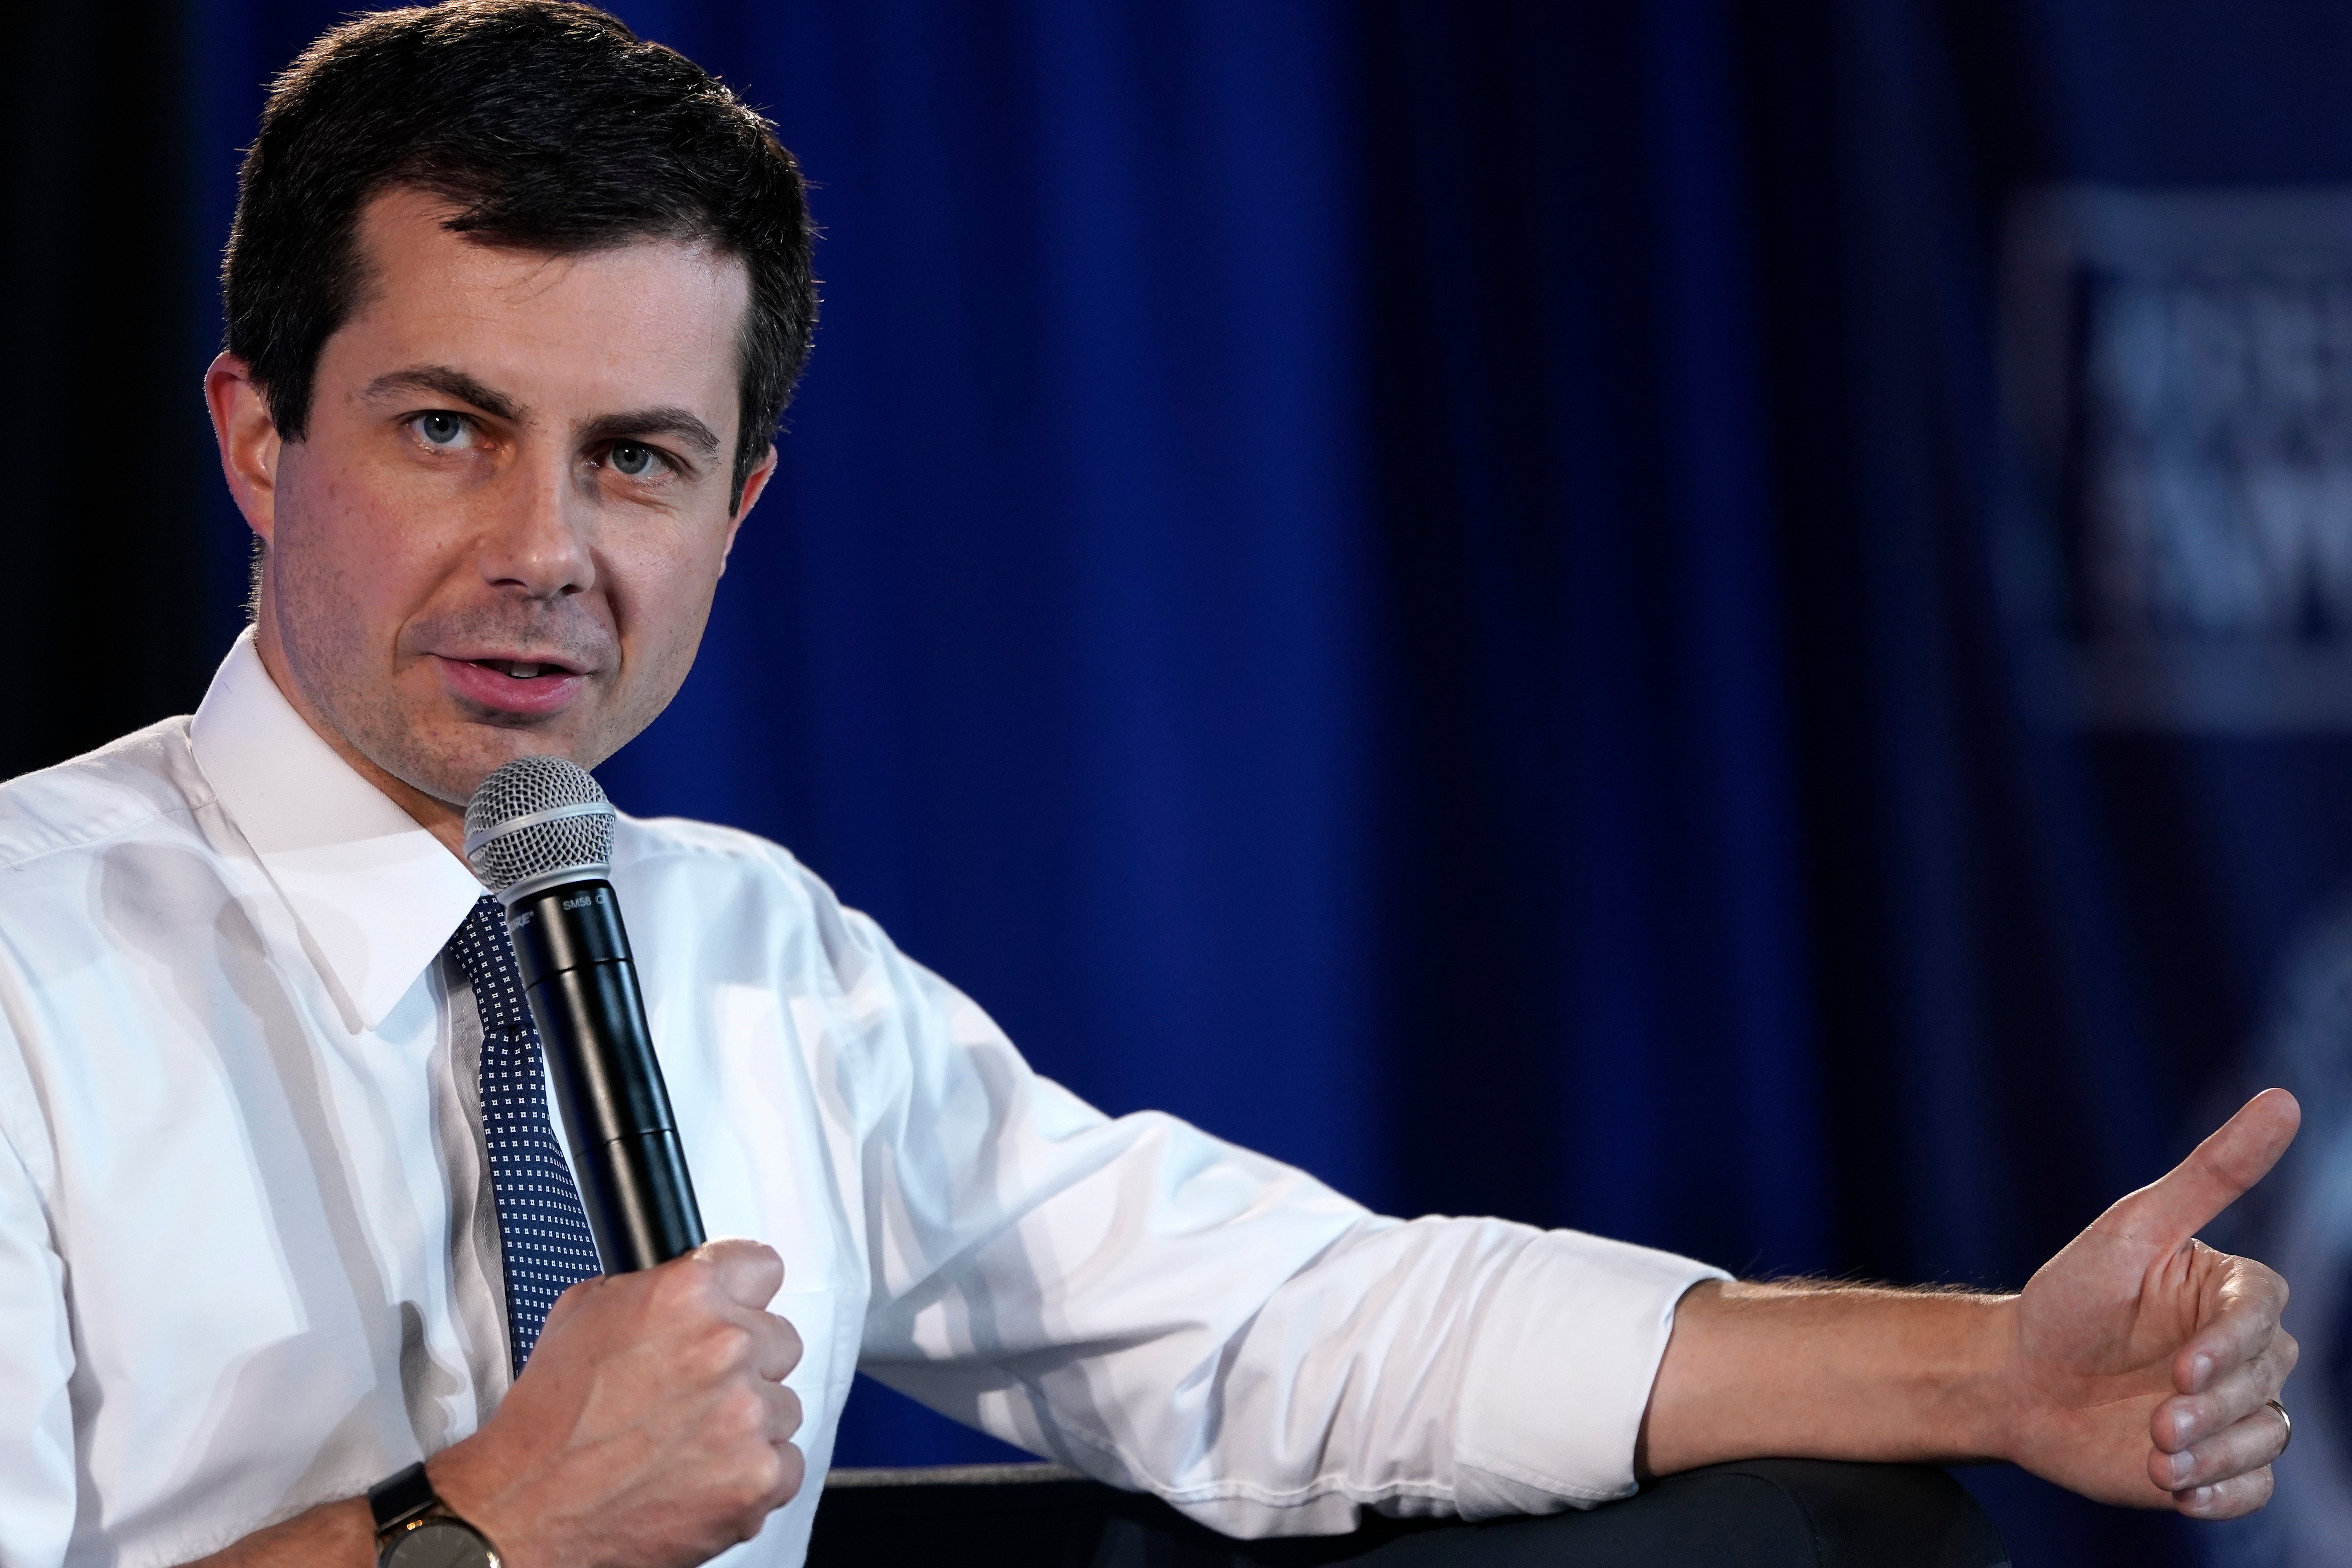 WATERLOO, IOWA - DECEMBER 06: Democratic presidential candidate South Bend, Indiana Mayor Pete Buttigieg answers questions at the U.S. Conference of Mayors Iowa Starting Line forum December 6, 2019 in Waterloo, Iowa. Buttigieg is currently under pressure to release details of his work for the consulting firm McKinsey & Company. (Photo by Win McNamee/Getty Images)